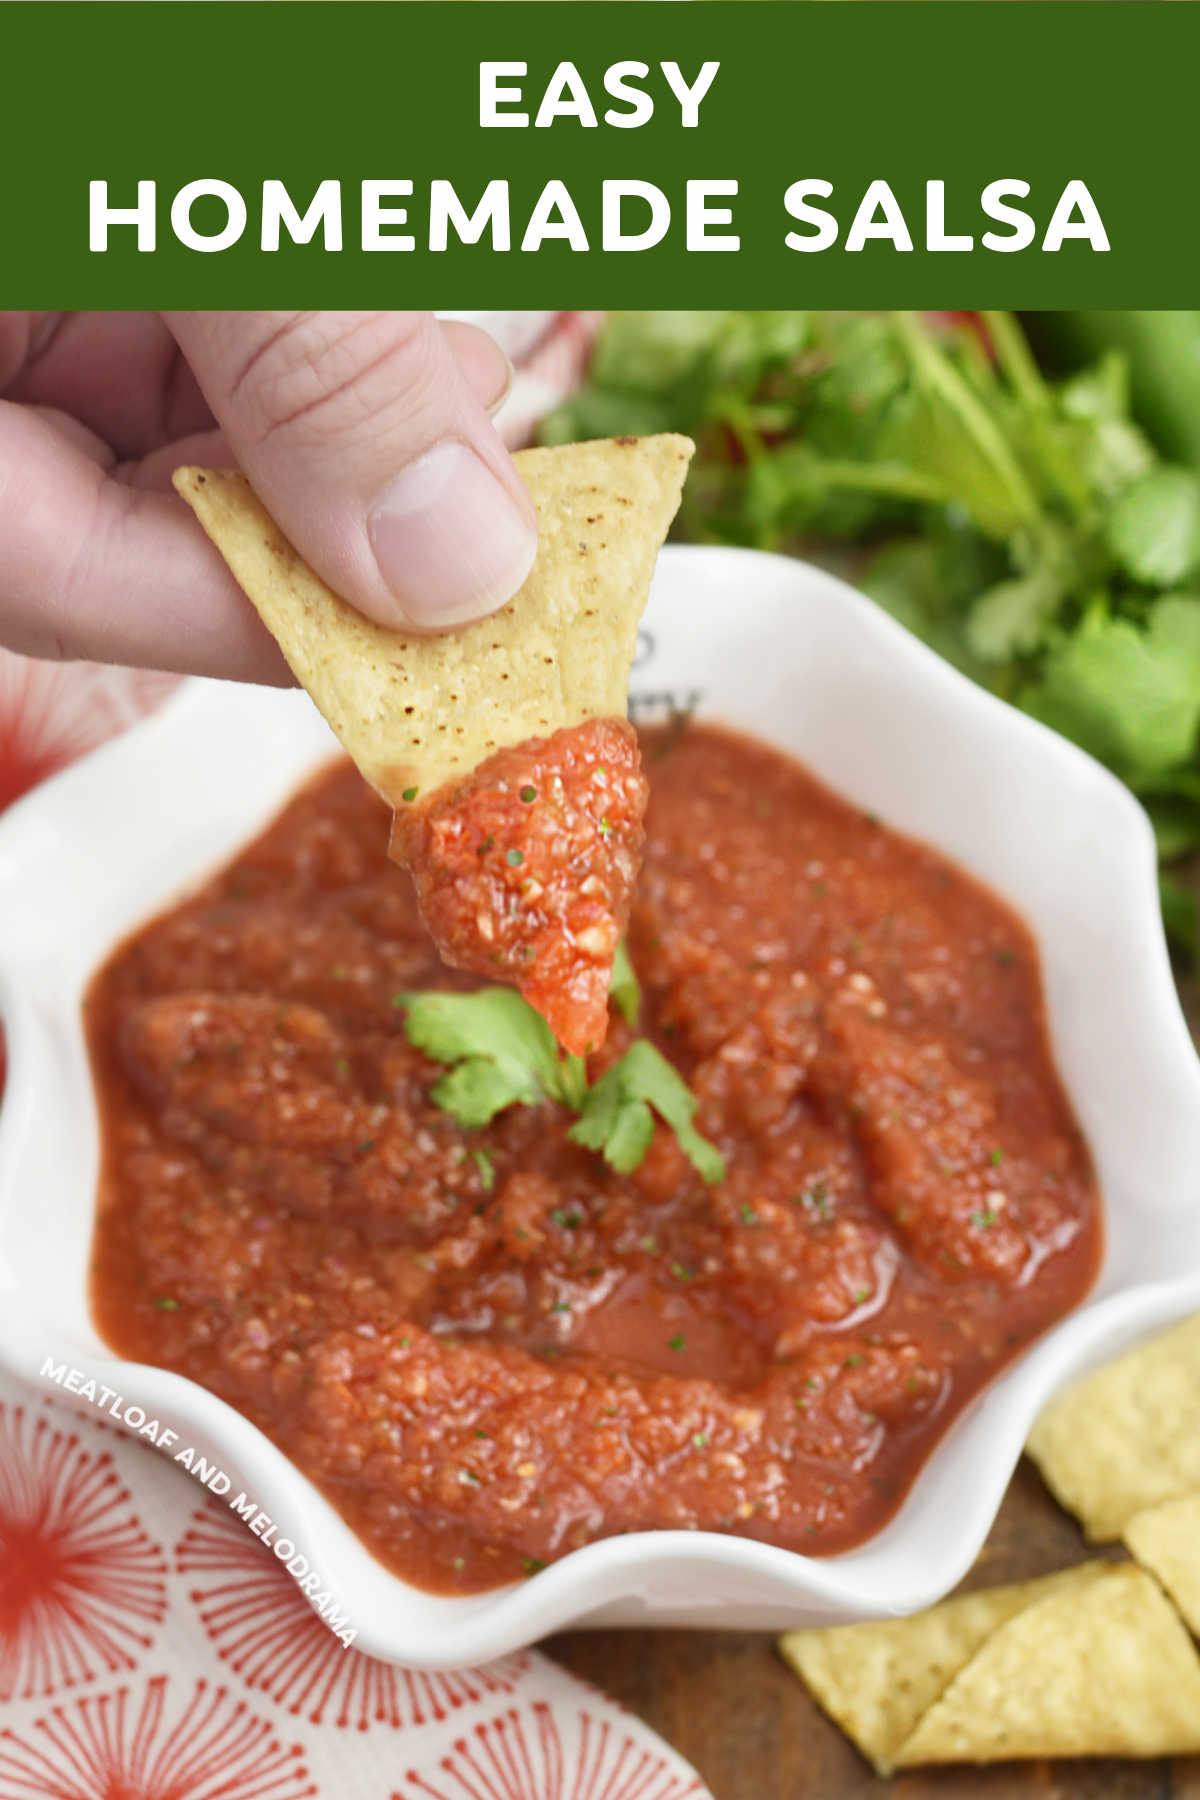 Make Easy Homemade Salsa with canned tomatoes and fresh ingredients in the blender. Pair this simple recipe with your favorite Mexican foods or serve with tortilla chips for an easy appetizer or snack. This mild restaurant style salsa goes with just about anything! via @meamel